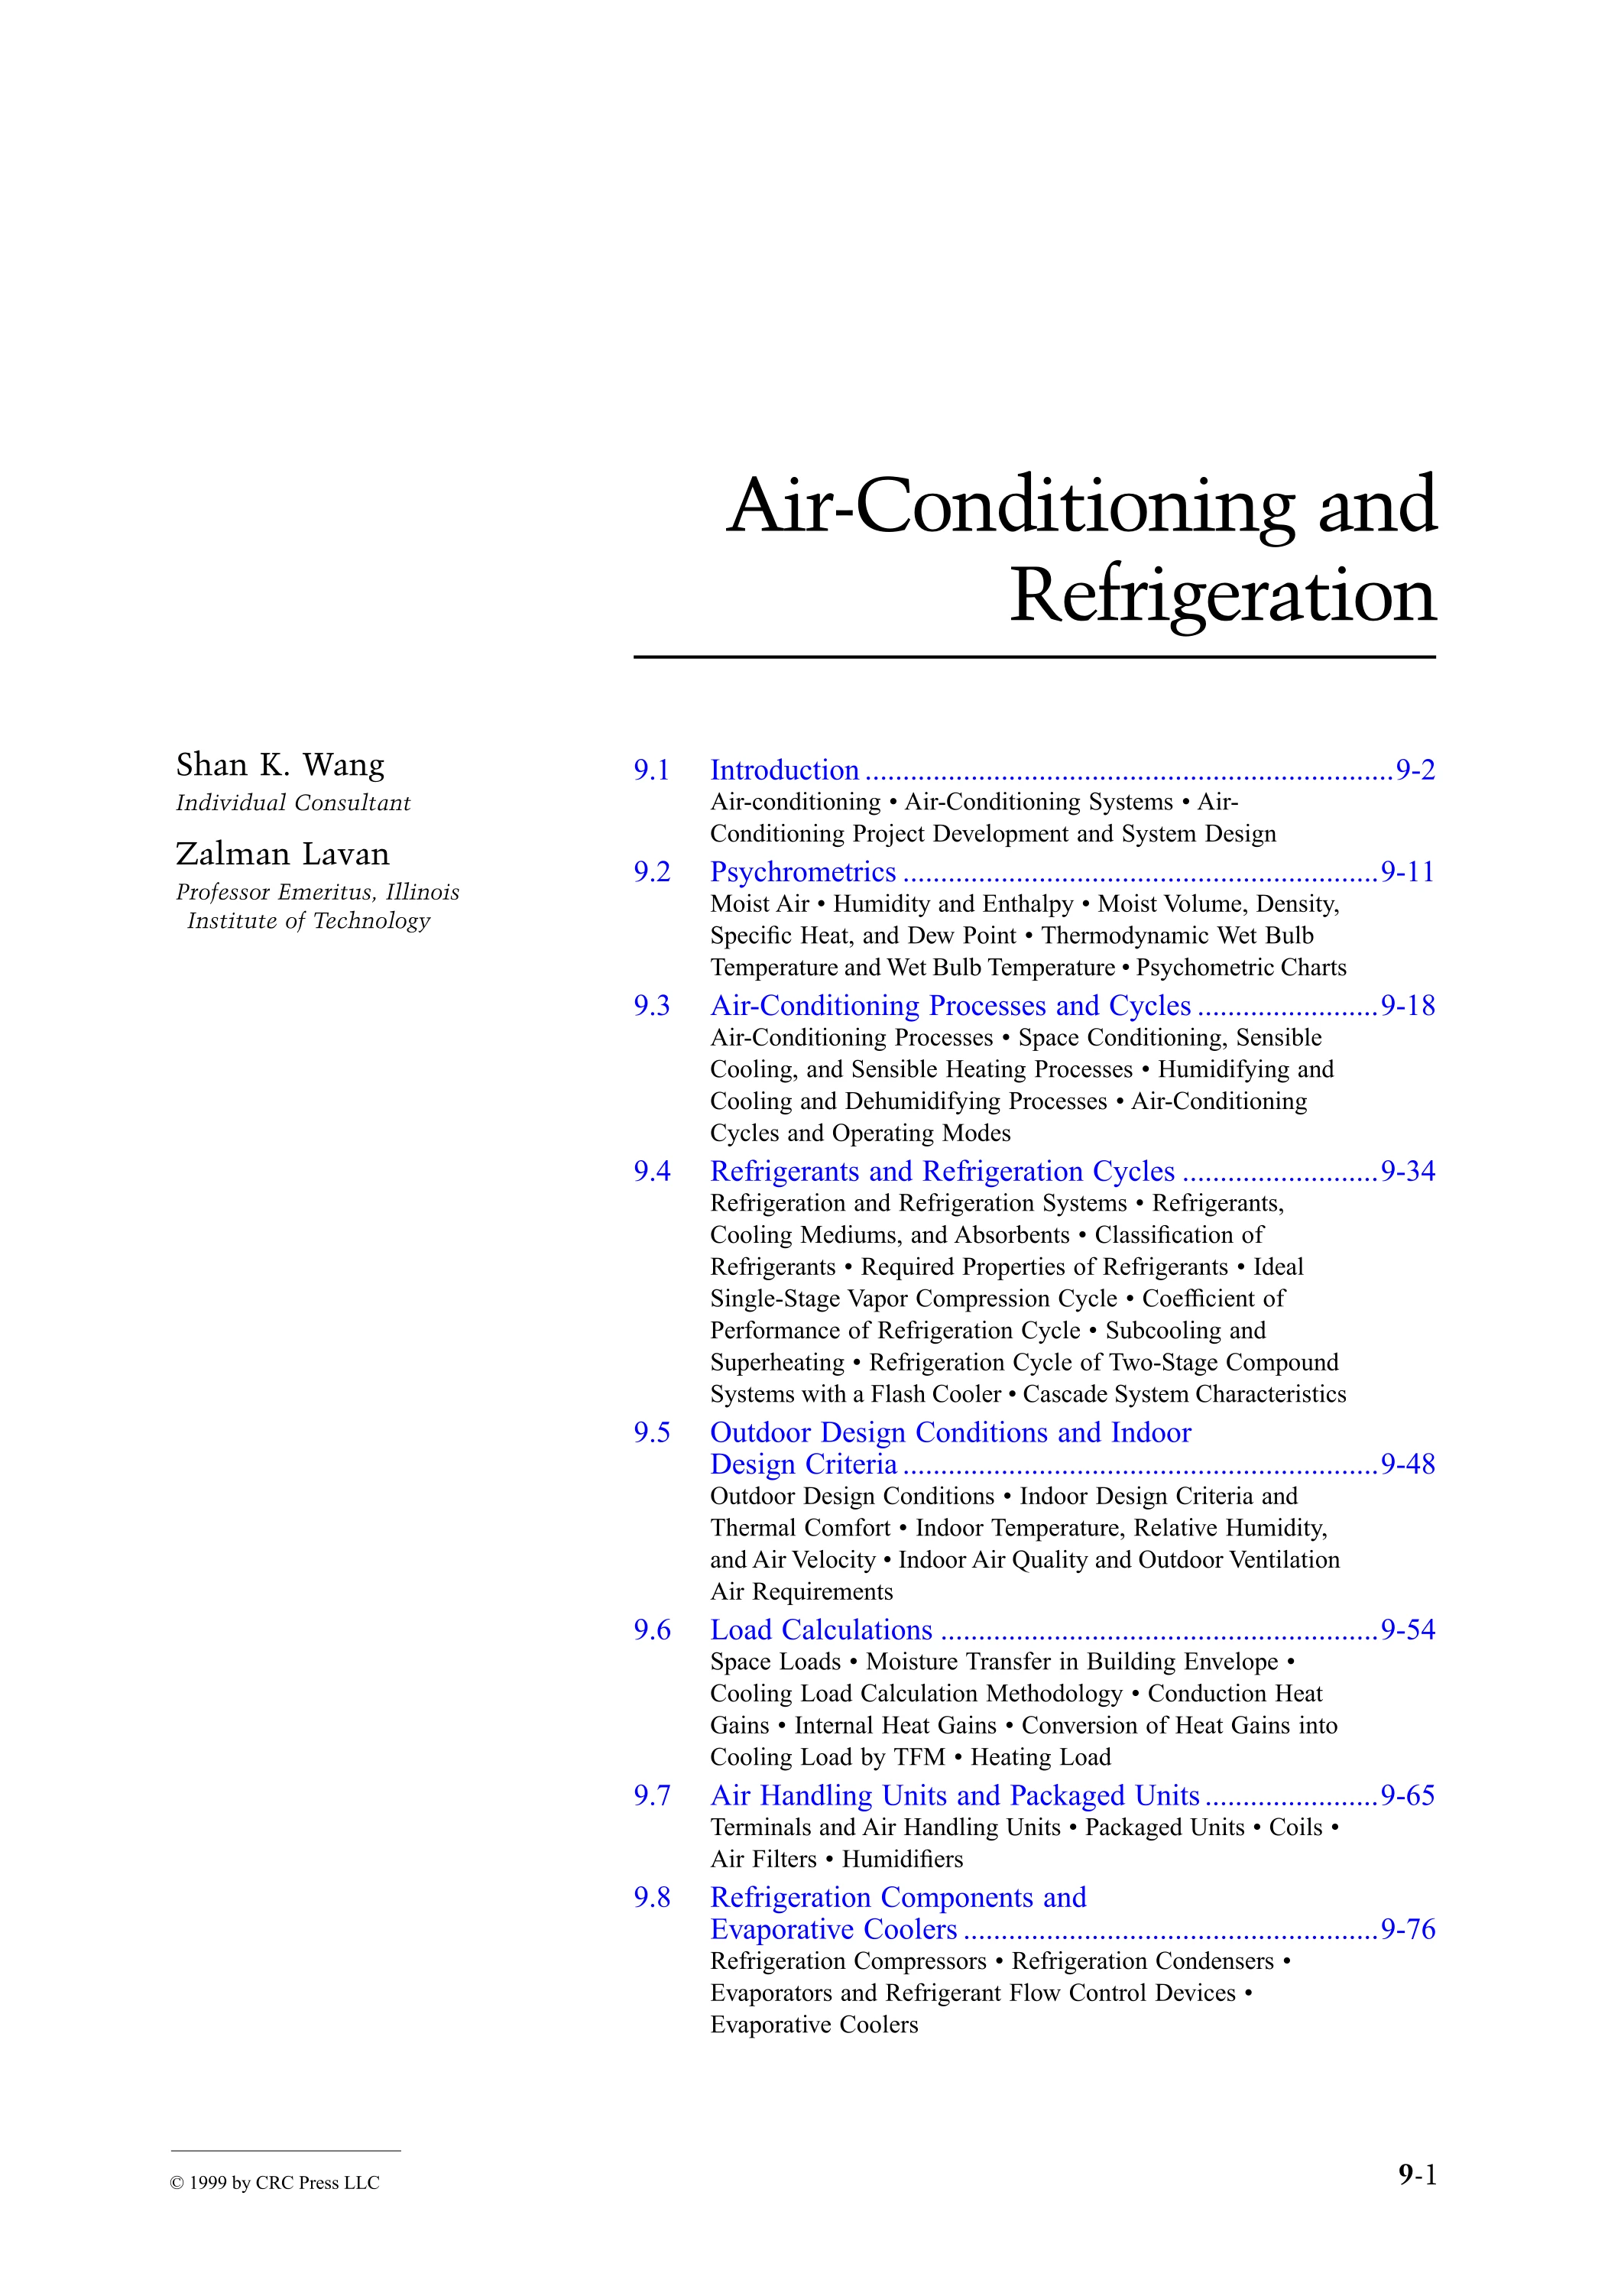 Air-Conditioning and Refrigeration